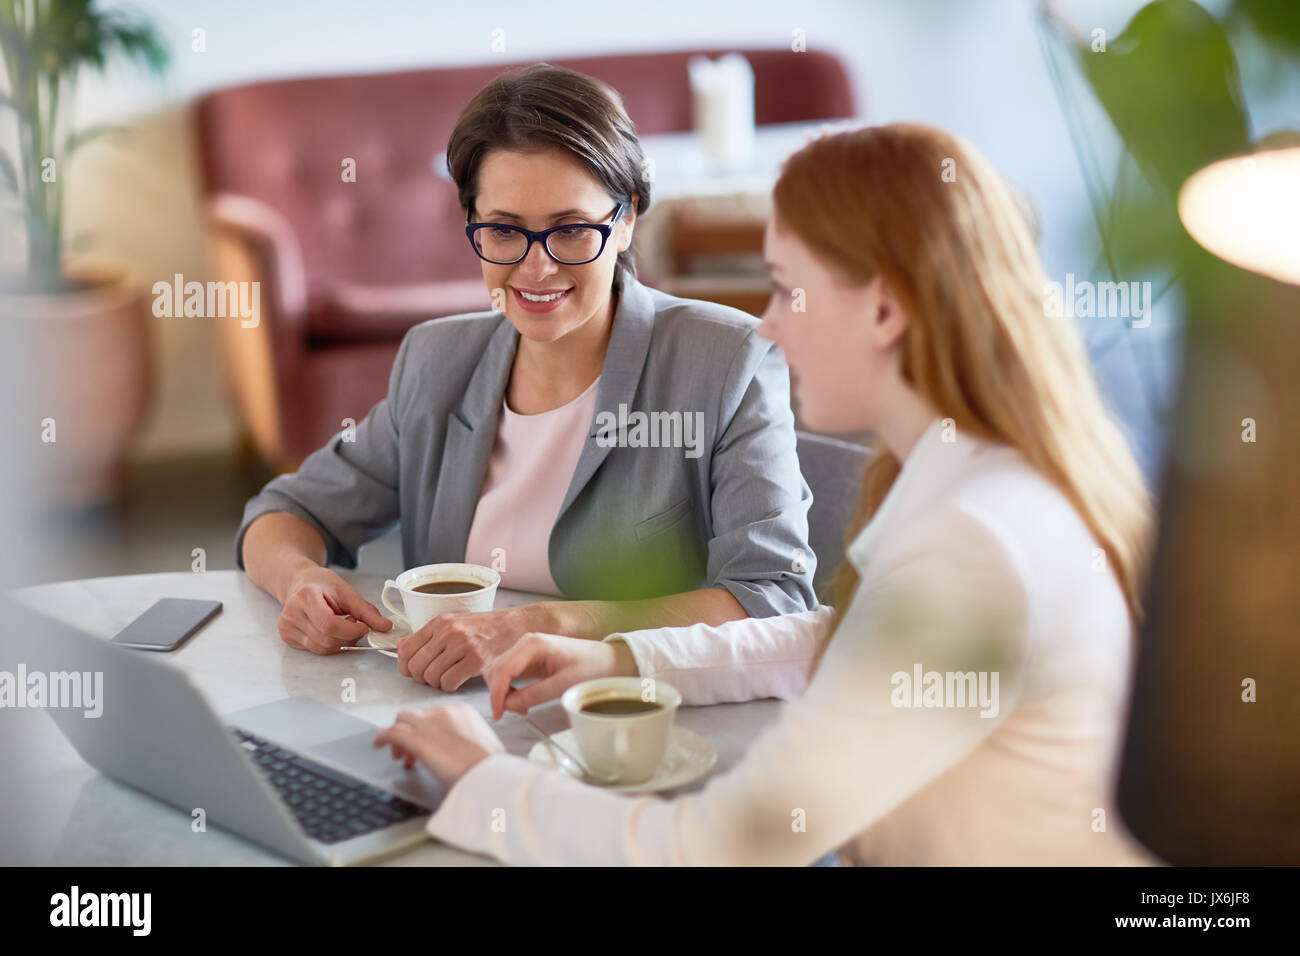 Productive Project Discussion at Coffeehouse Stock Photo